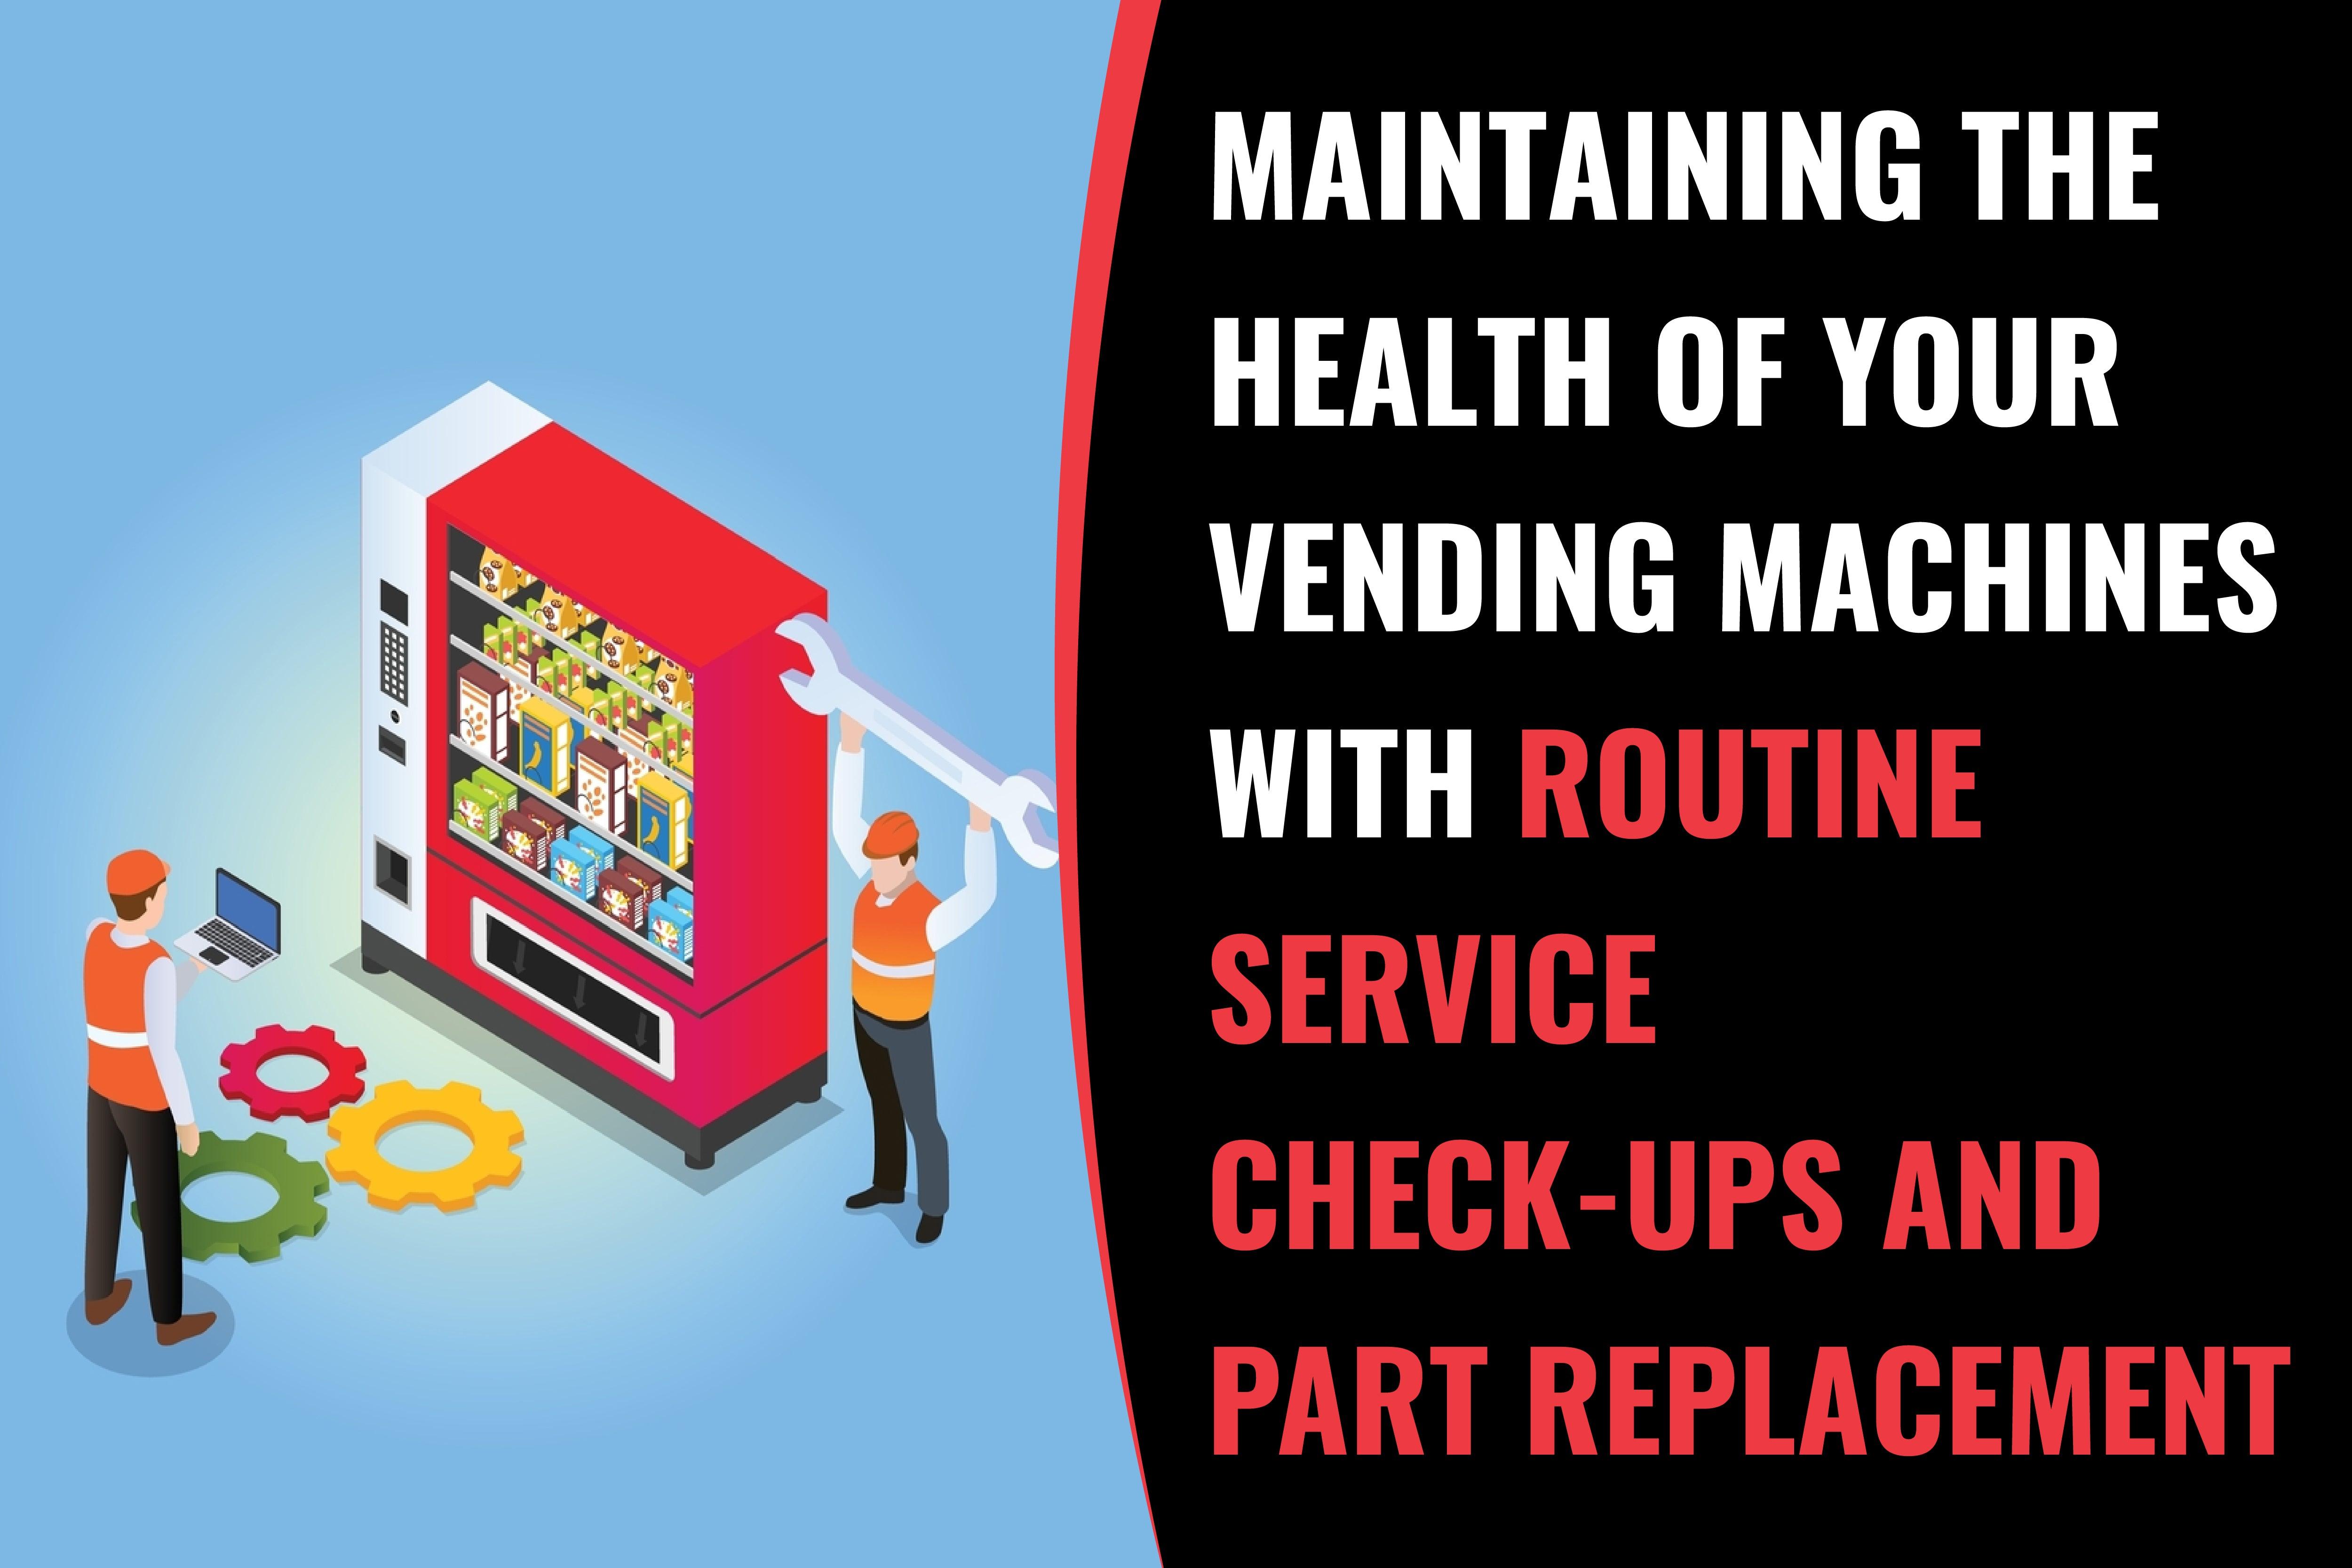 Vending Maintenance: Maintaining the Health of Your Vending Machines with Routine Service Check-Ups and Part Replacement - Vendnet